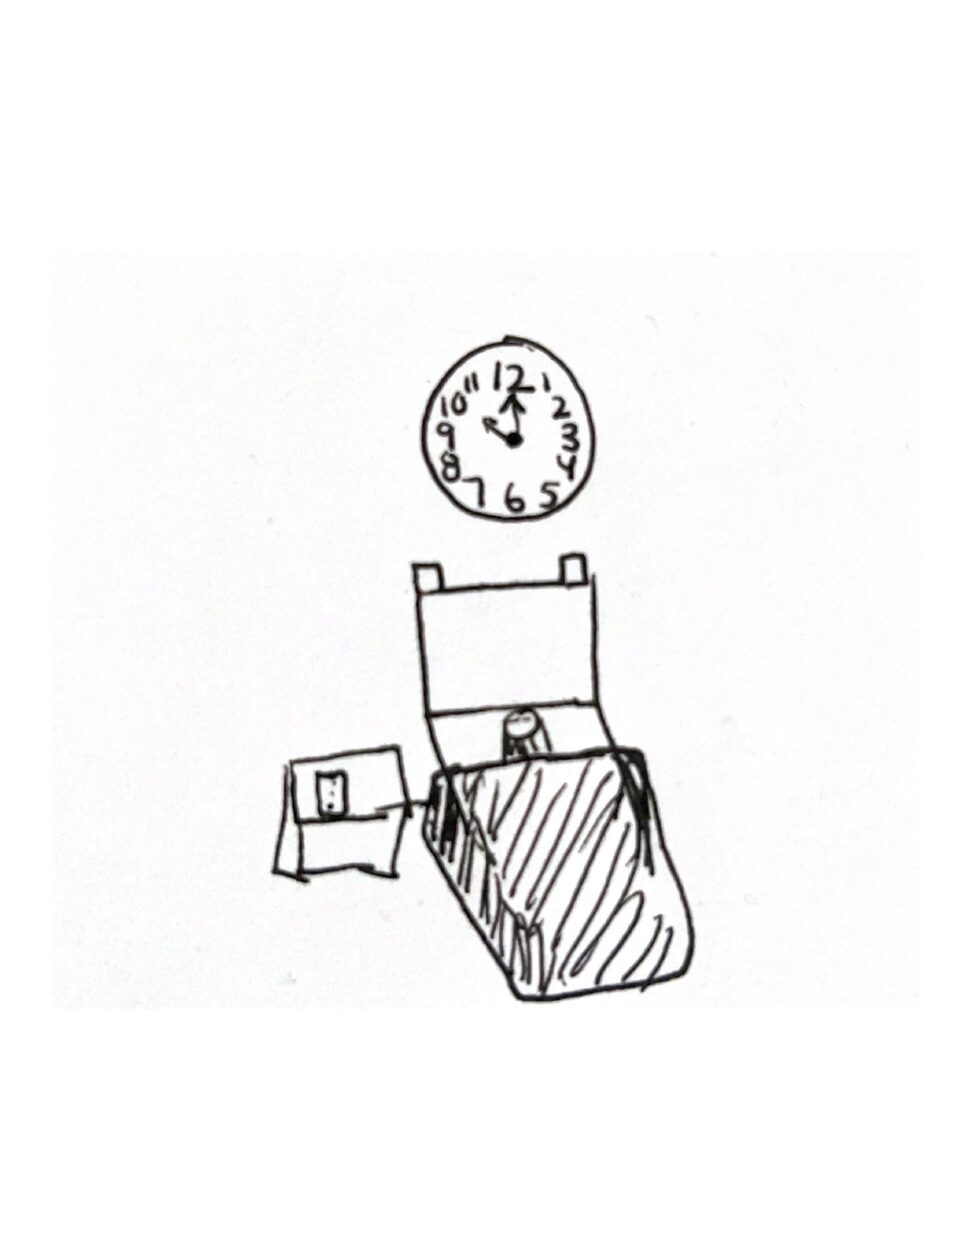 Figure in bed, time is 10pm on the clock. The figure is laying down and the phone is on the side table. Figures eyes are closed